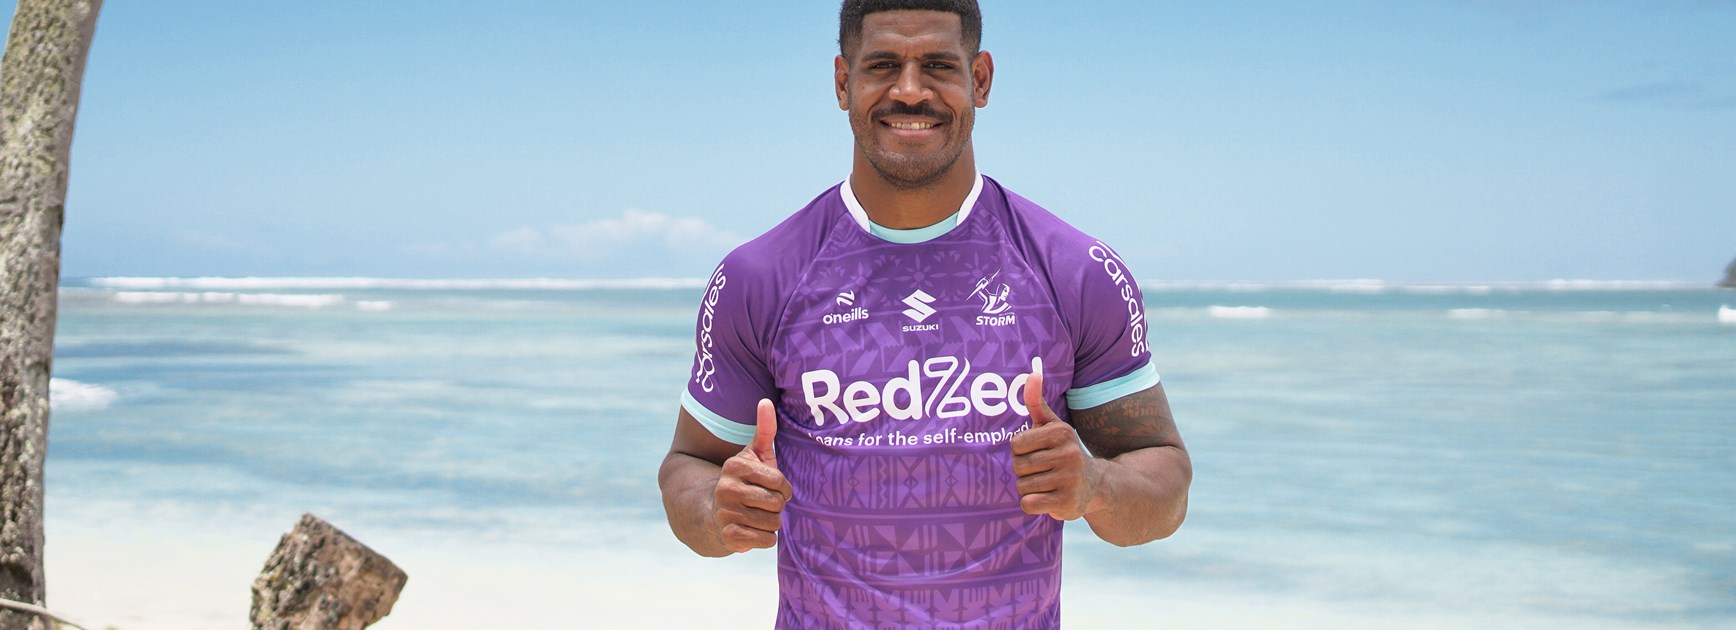 Storm to play historic Fiji game